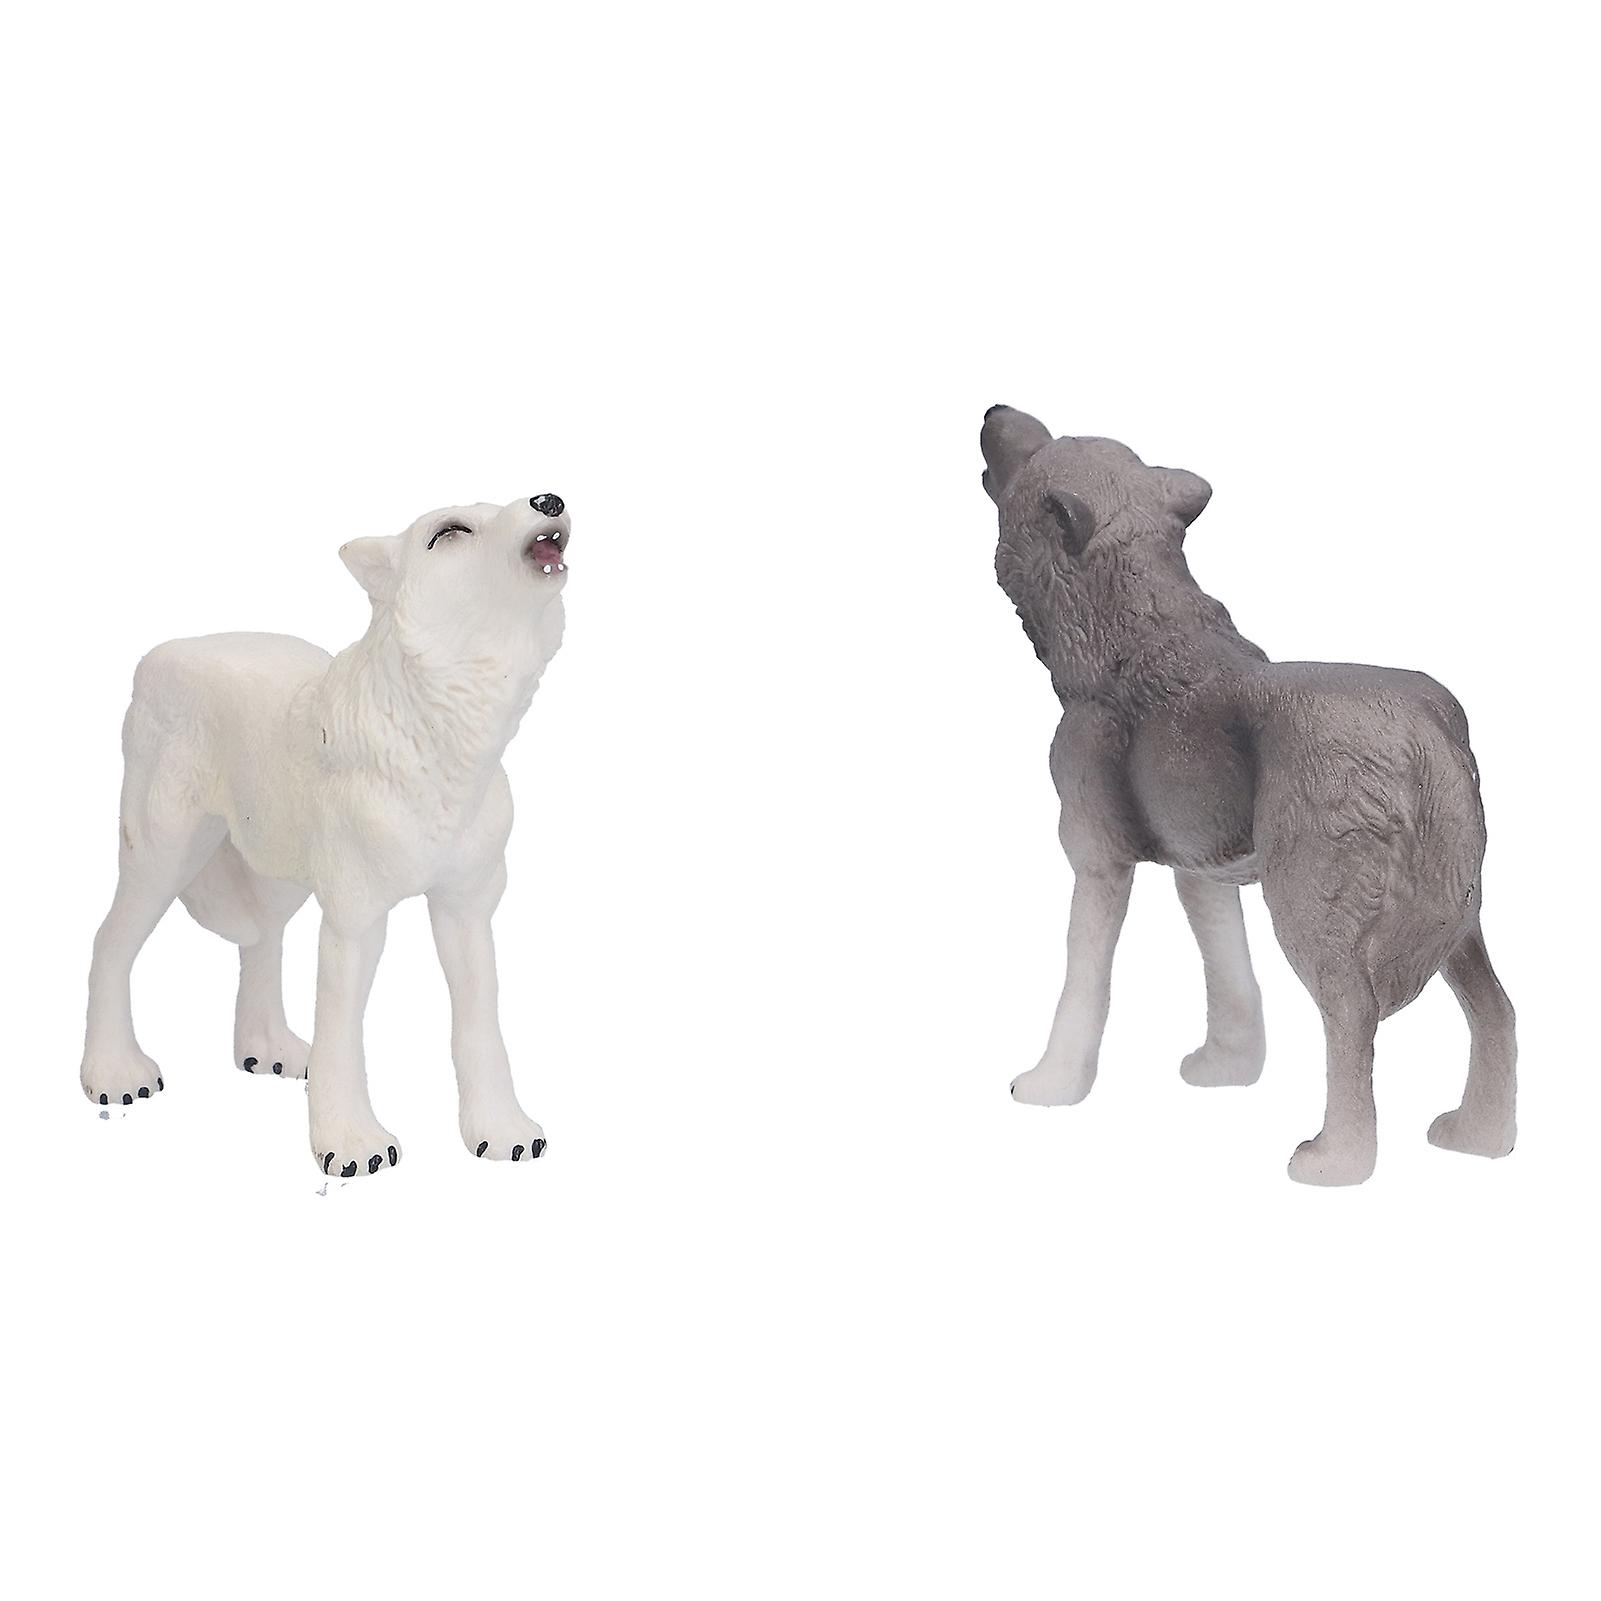 2pcs Howling Wolf Action Figure Figurines Toys Howling Wolf Animal Model Educational Presents For Kids